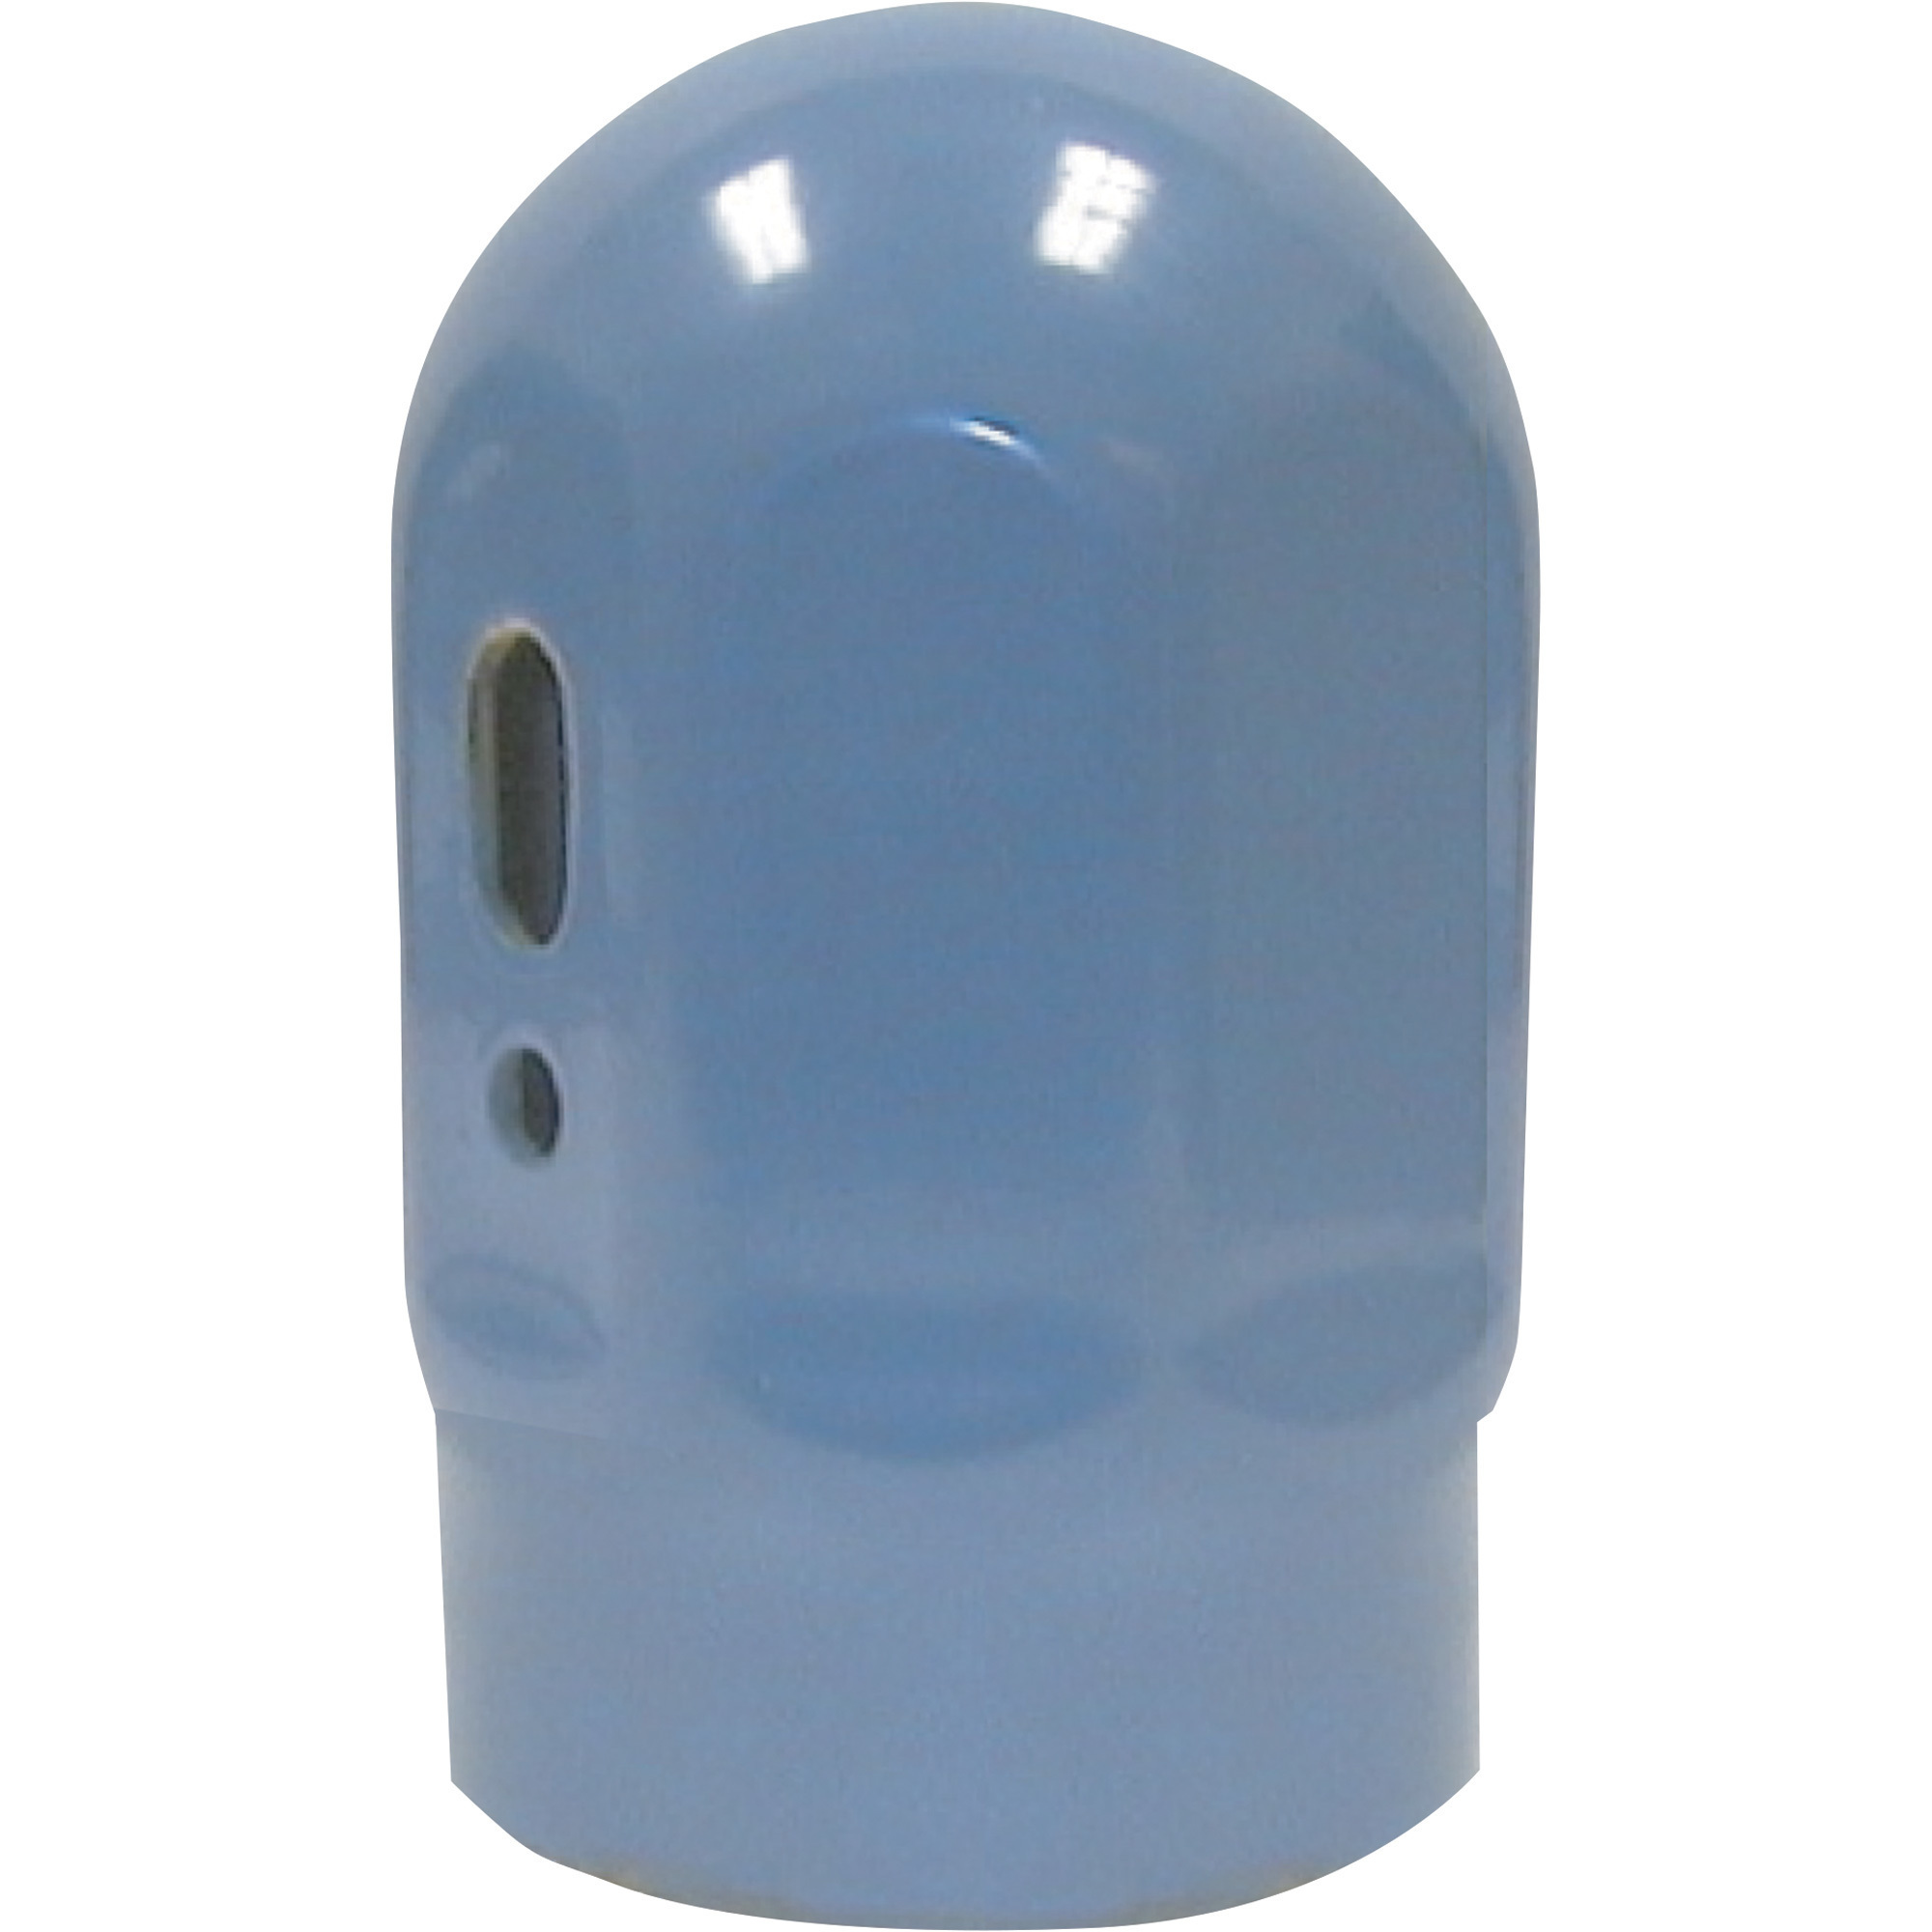 Thoroughbred Replacement Cylinder Cap â Acetylene, Fits Sizes 2 Cylinders and Above, Model TBCA-20